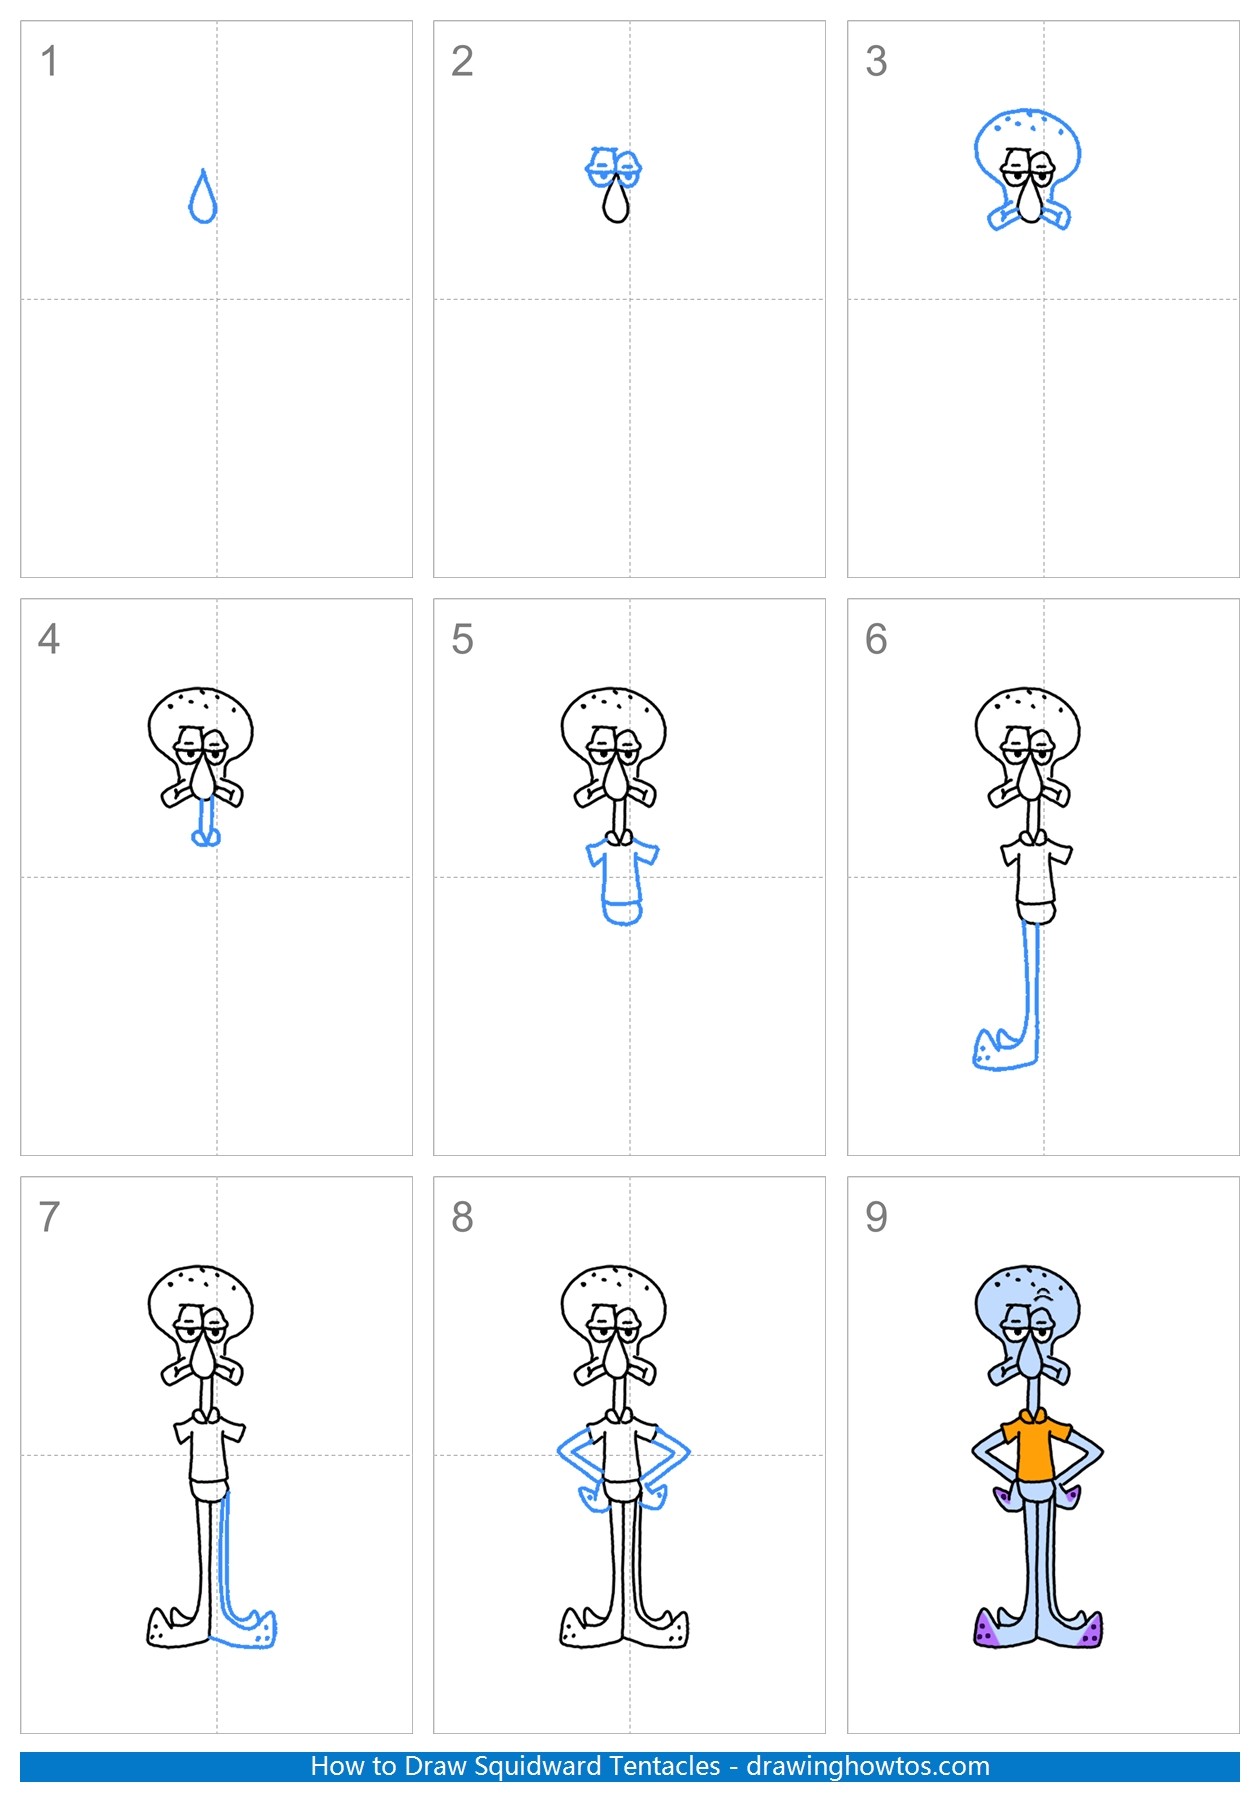 How to Draw Squidward Tentacles Step by Step